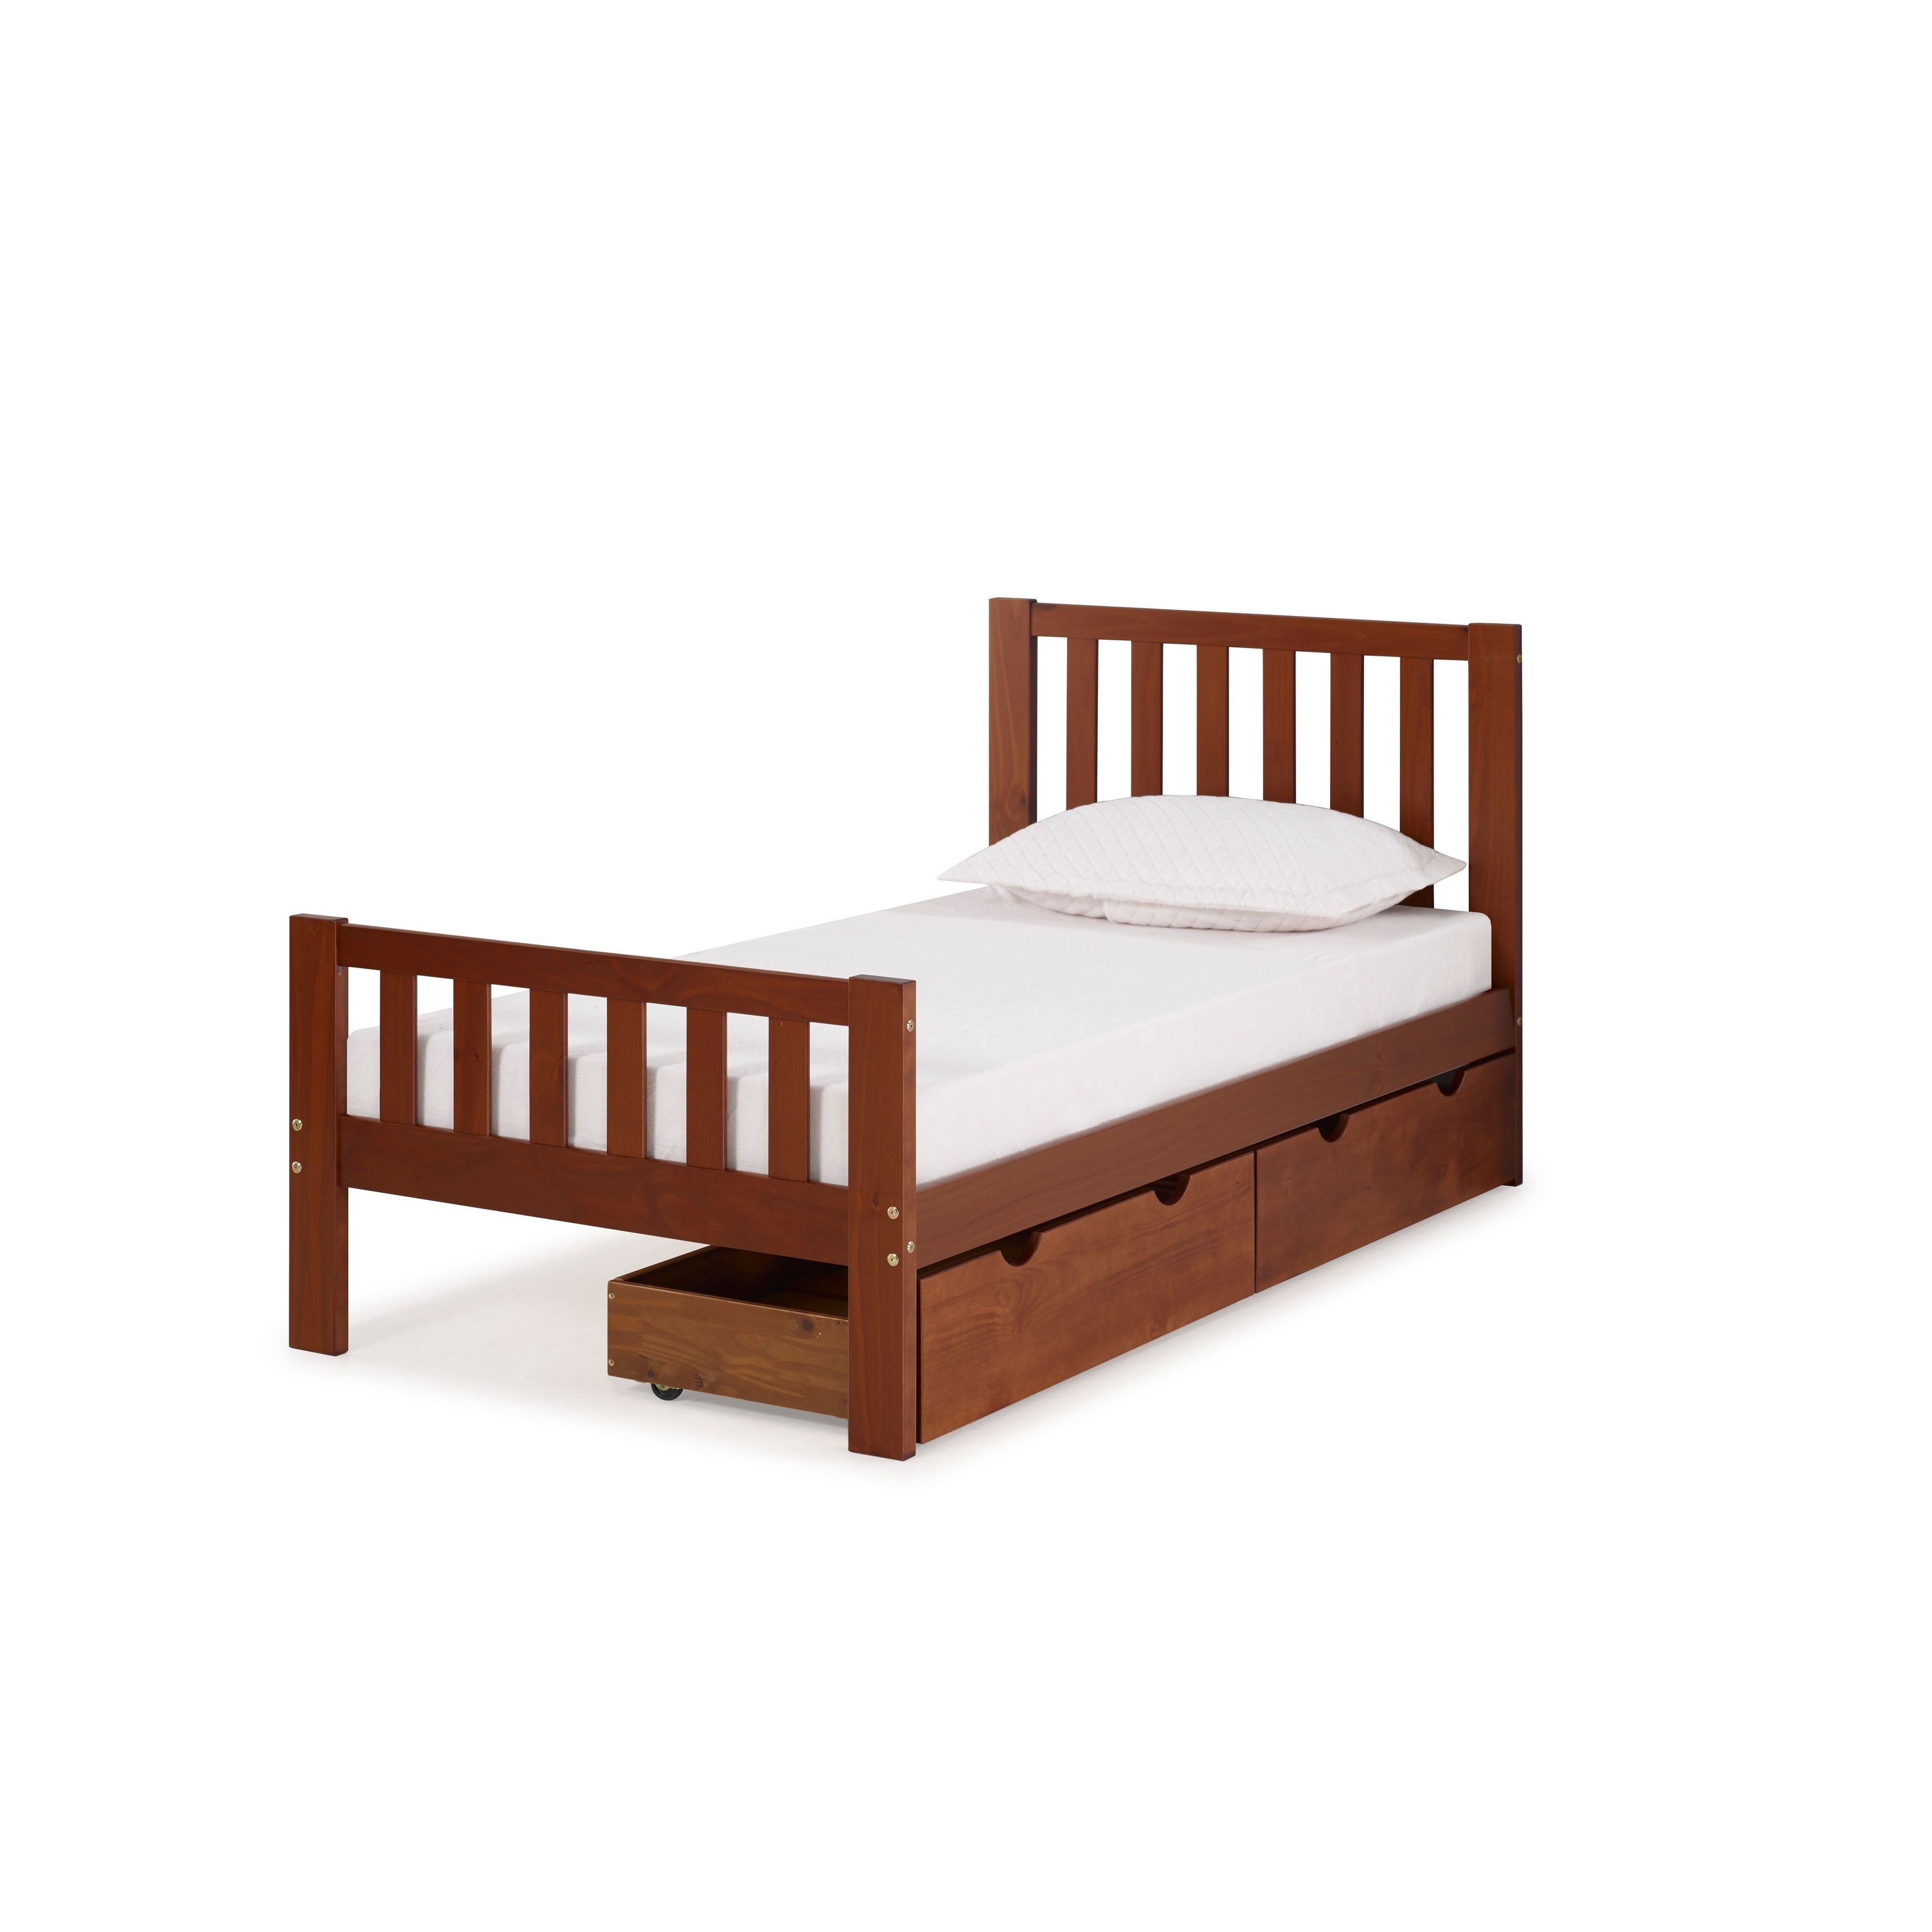 Aurora Solid Wood Twin Bed With Storage Drawers Overstock 22406191 Brown